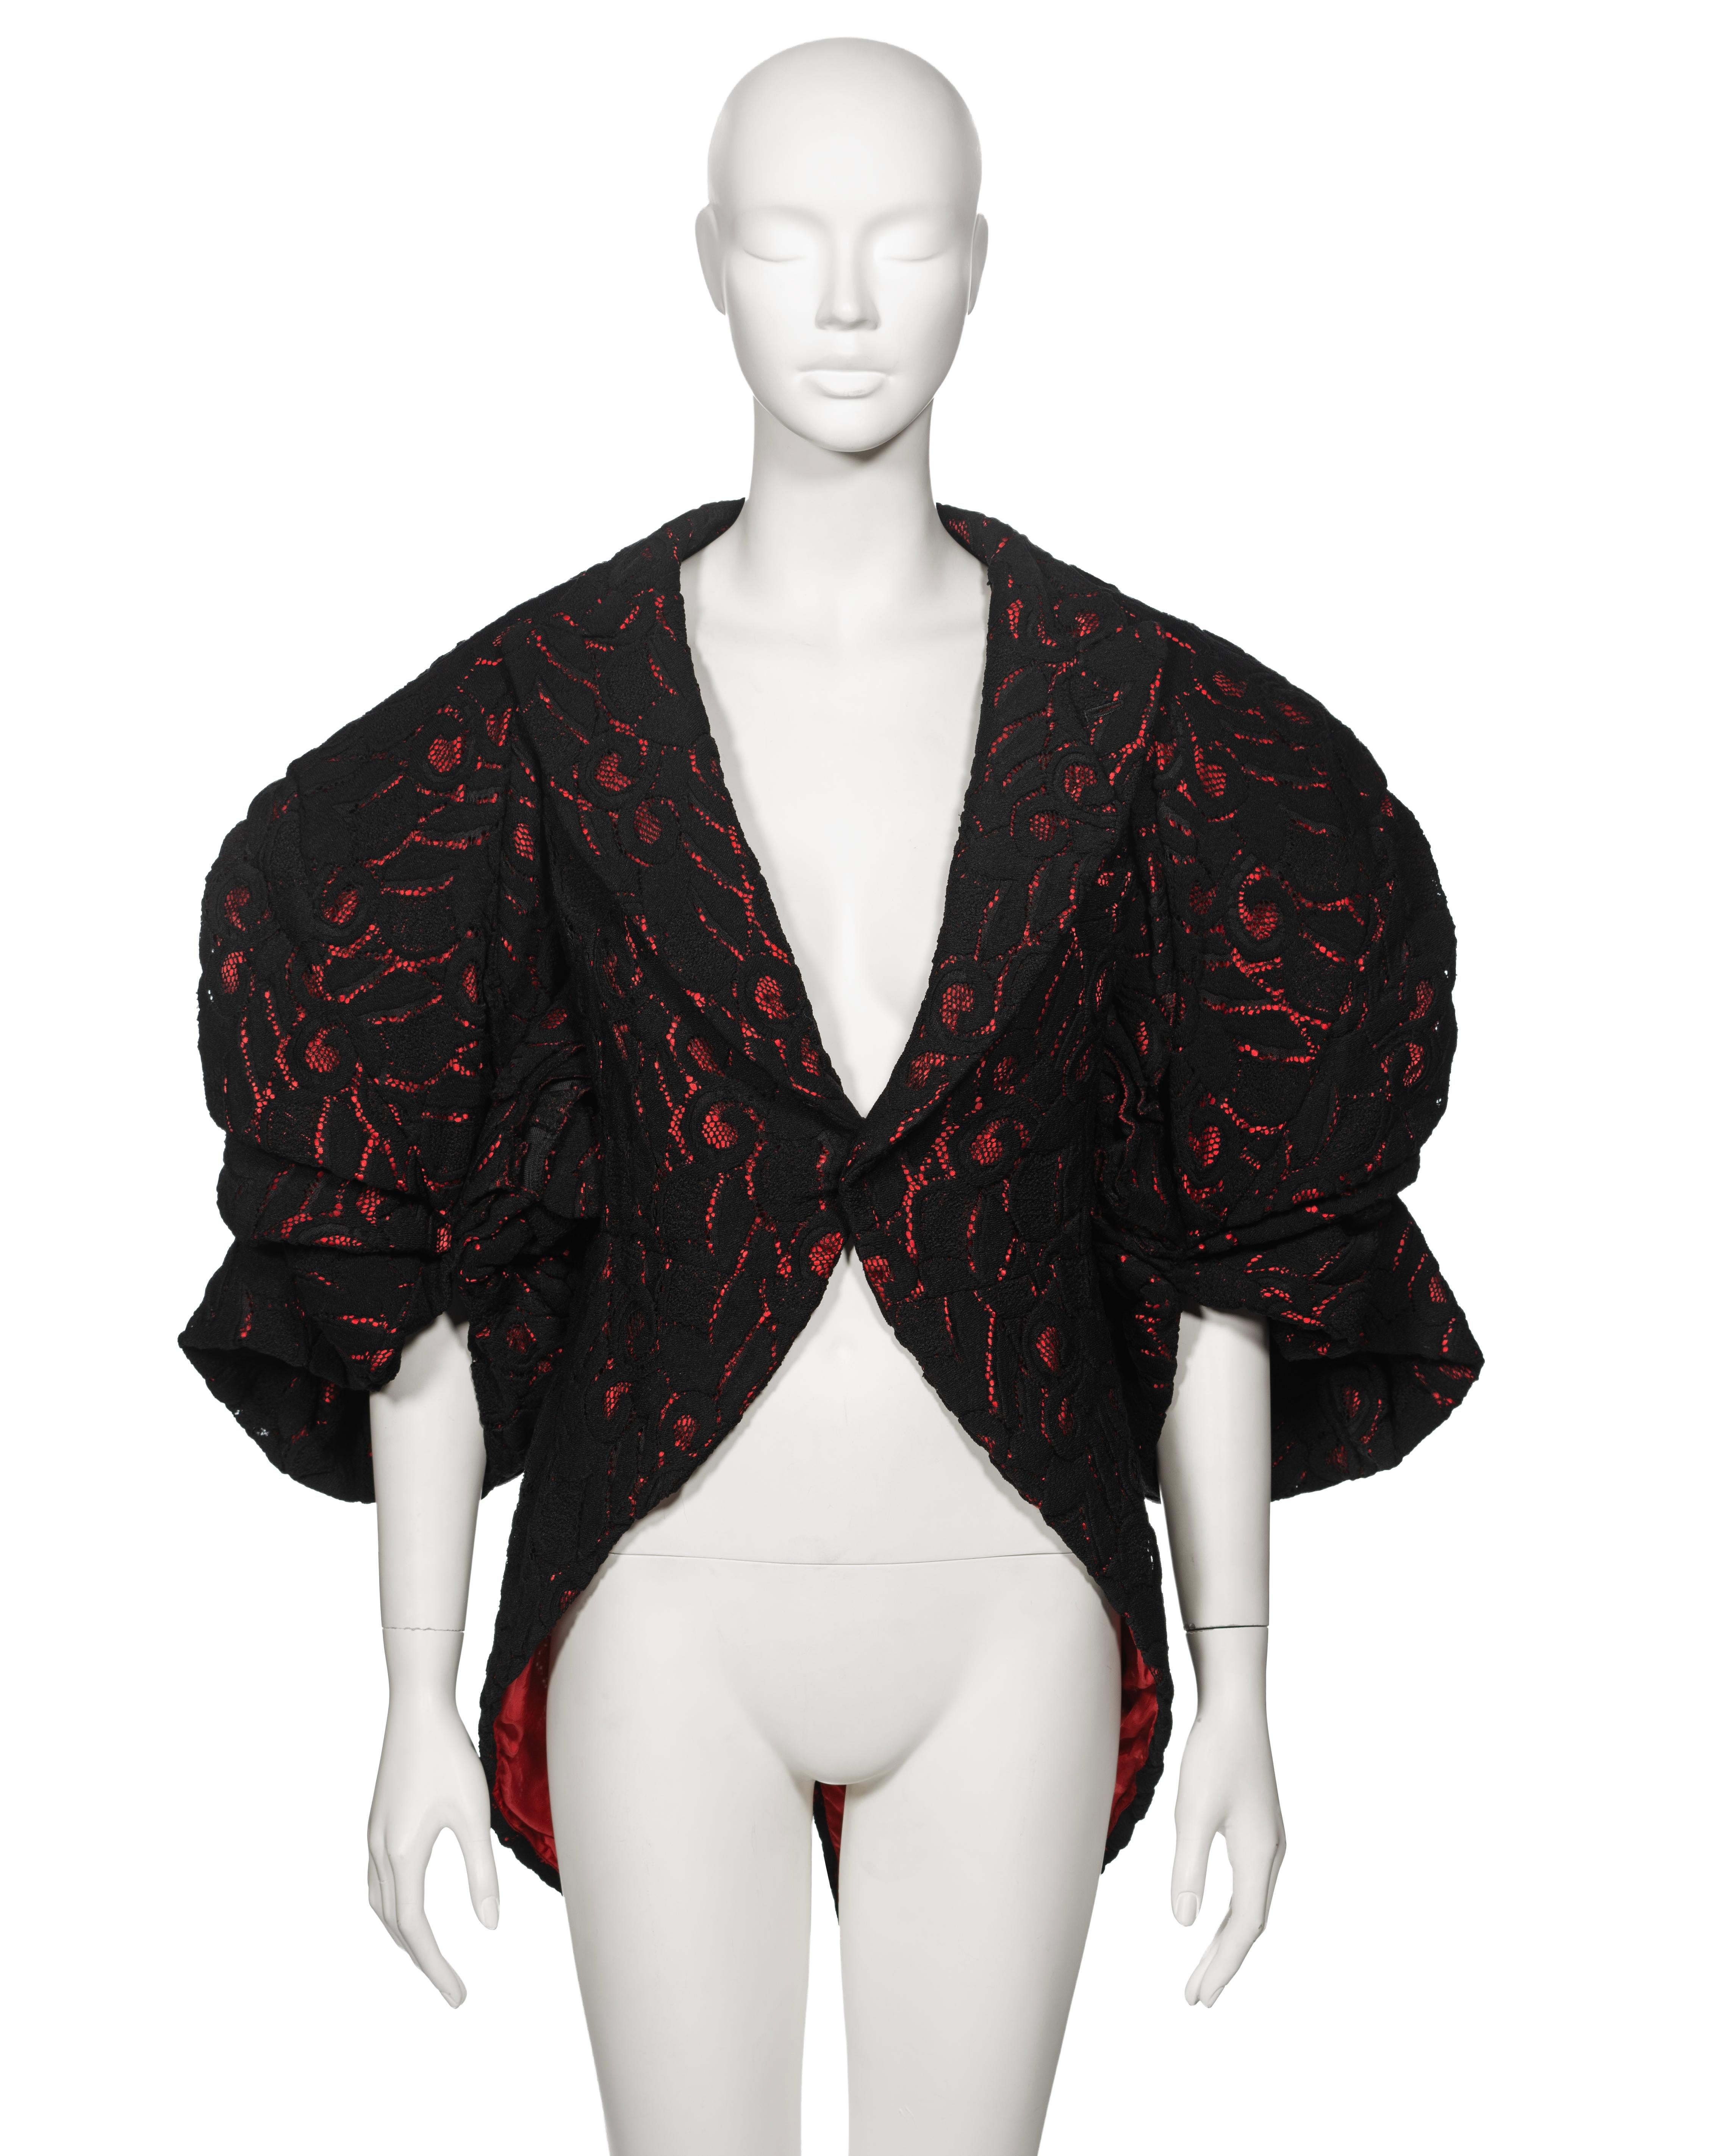 ▪ A Rare Comme des Garçons Runway jacket 
▪ Fall-Winter 2013
▪ Sold by One of a Kind Archive
▪ Fashioned from black cotton lace complemented by a contrasting red lining
▪ Single-breasted silhouette
▪ Features wide peak lapels
▪ Tailcoat-style